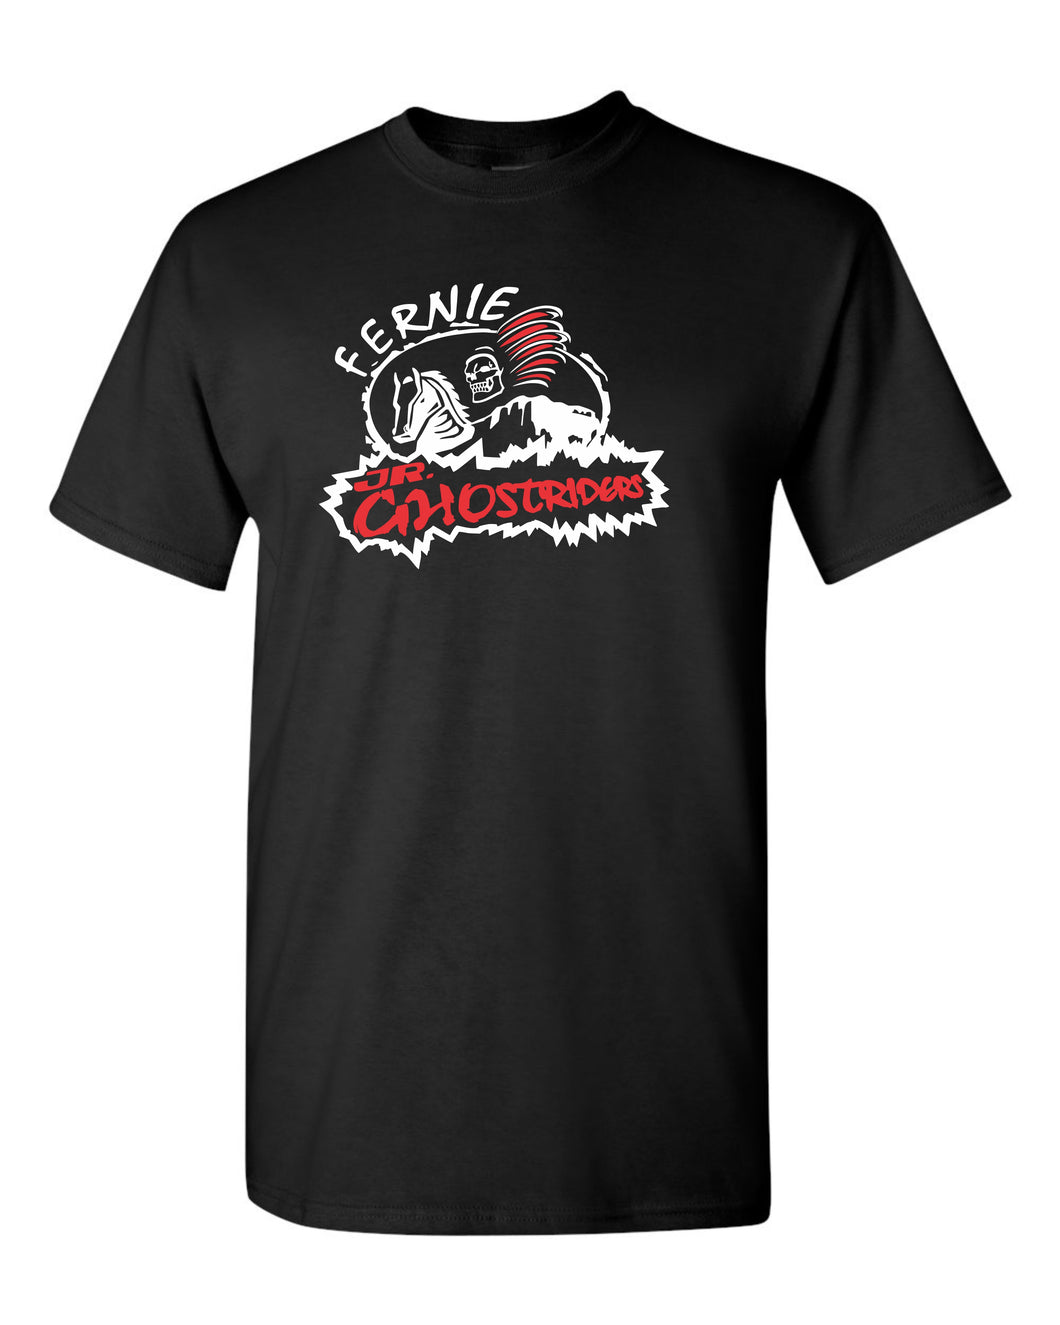 T-SHIRT - GHOSTRIDERS LOGO - YOUTH